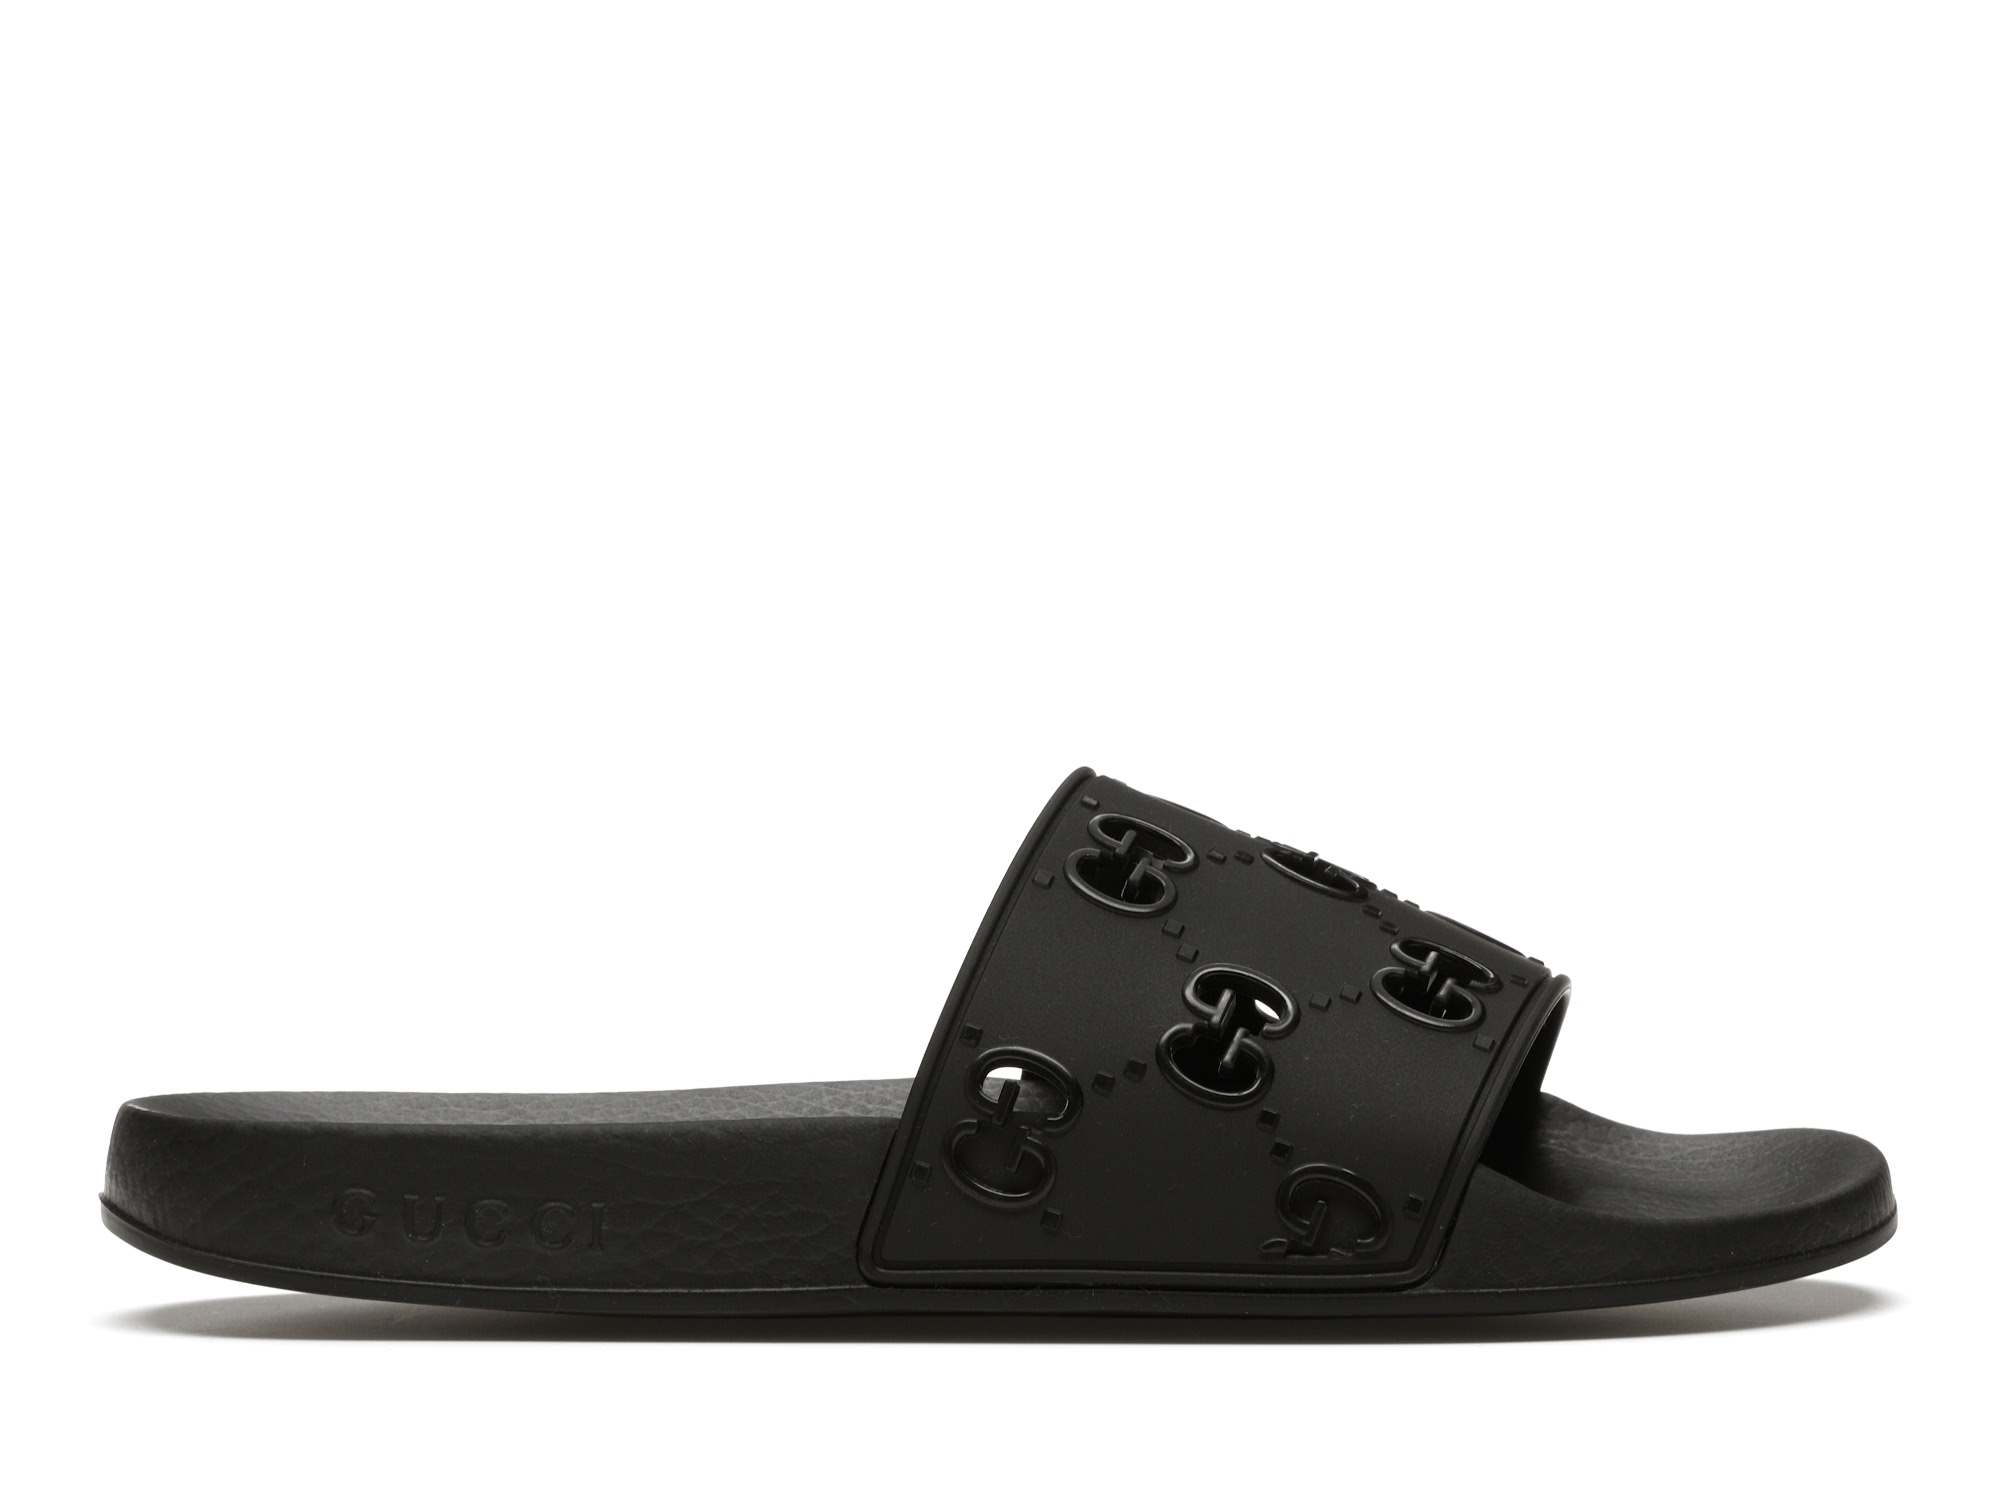 Gucci Sandals for Women on sale - Outlet | FASHIOLA.co.uk